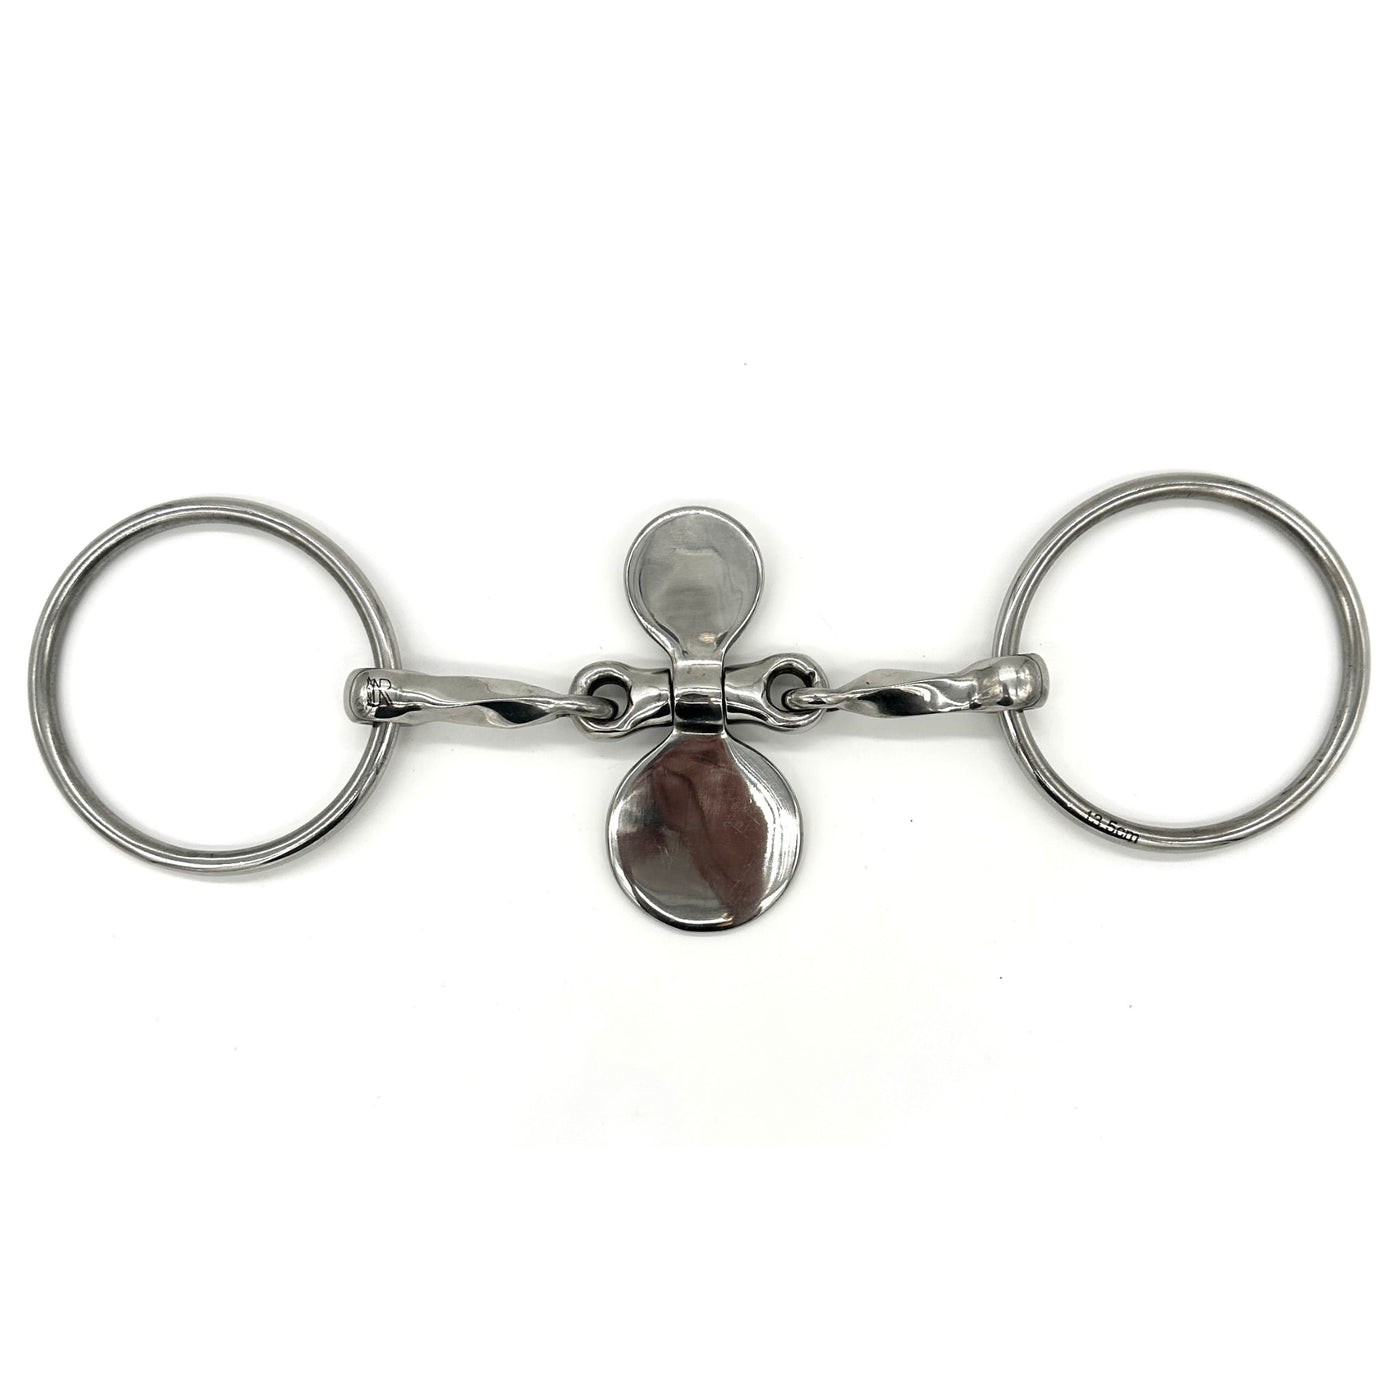 Double Jointed Twisted Propeller Loose Ring Bit